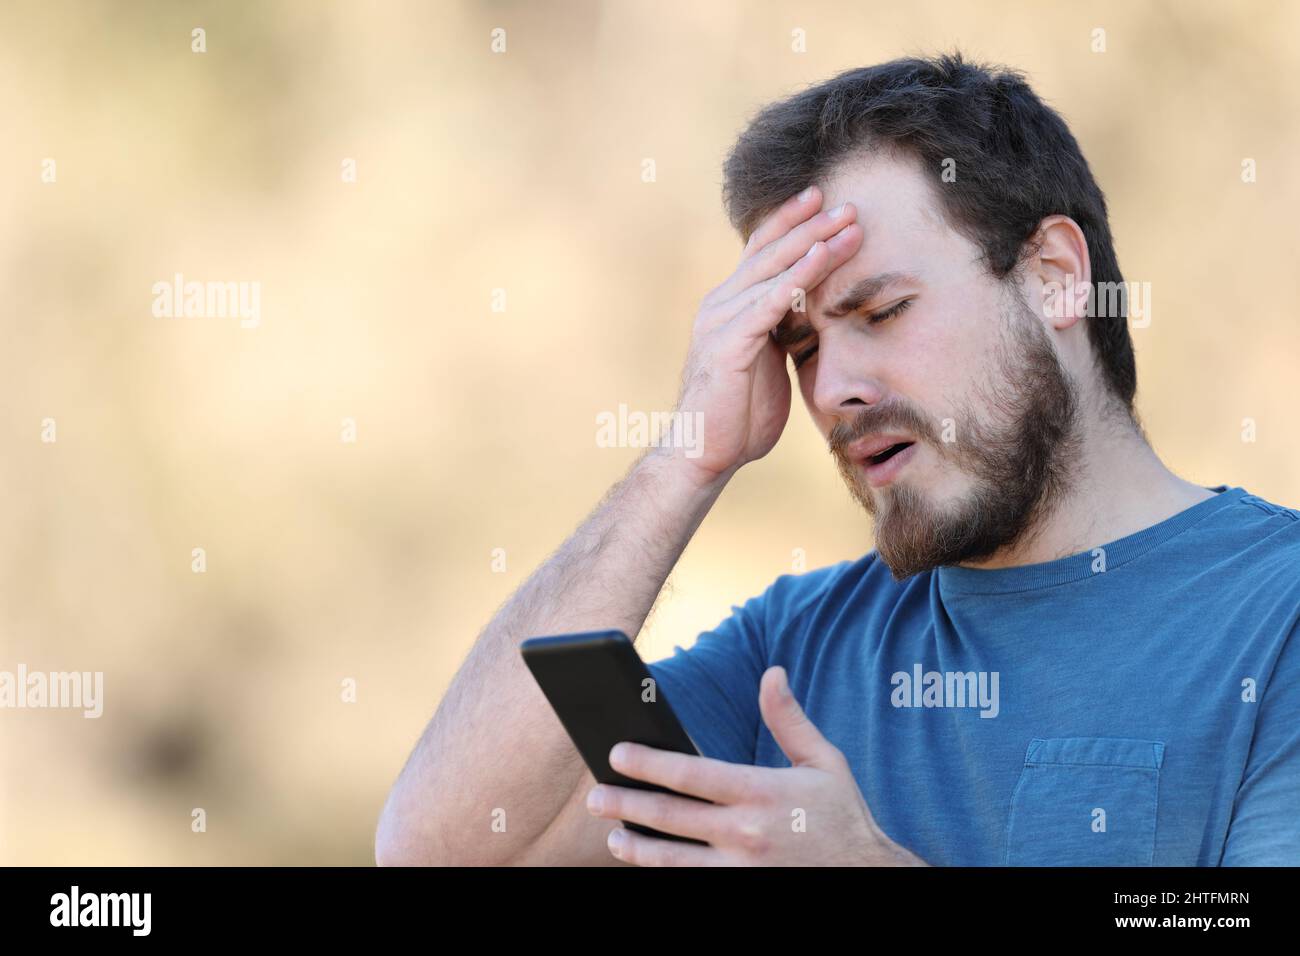 Worried man complaining looking at smart phone after mistake Stock Photo